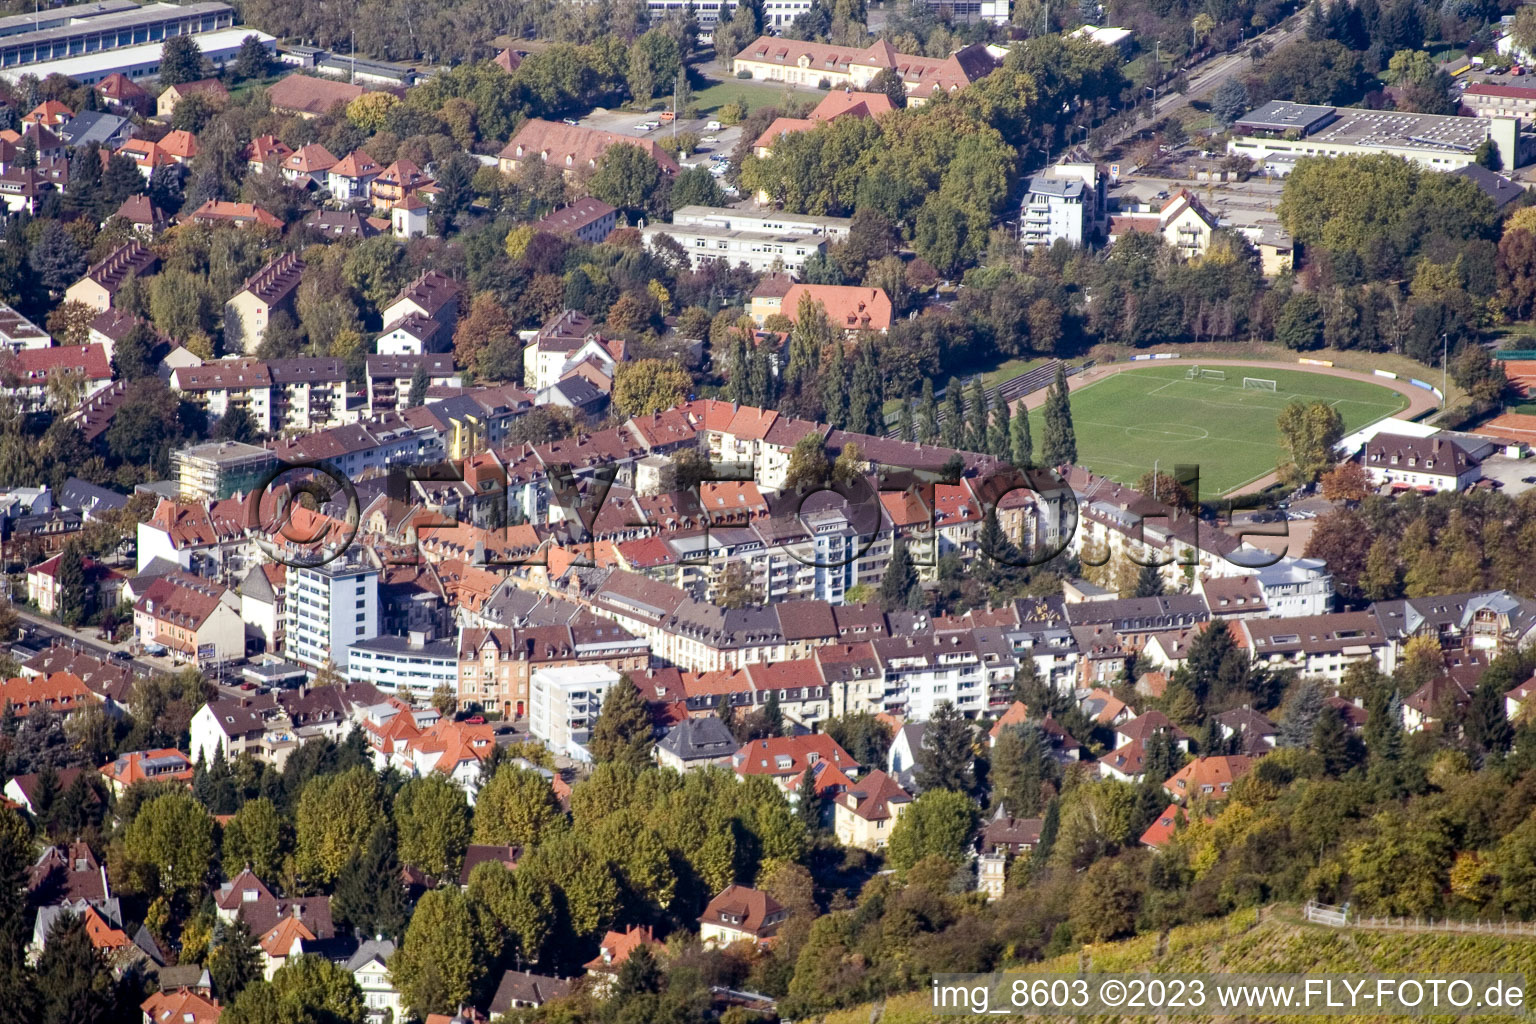 District Durlach in Karlsruhe in the state Baden-Wuerttemberg, Germany seen from above